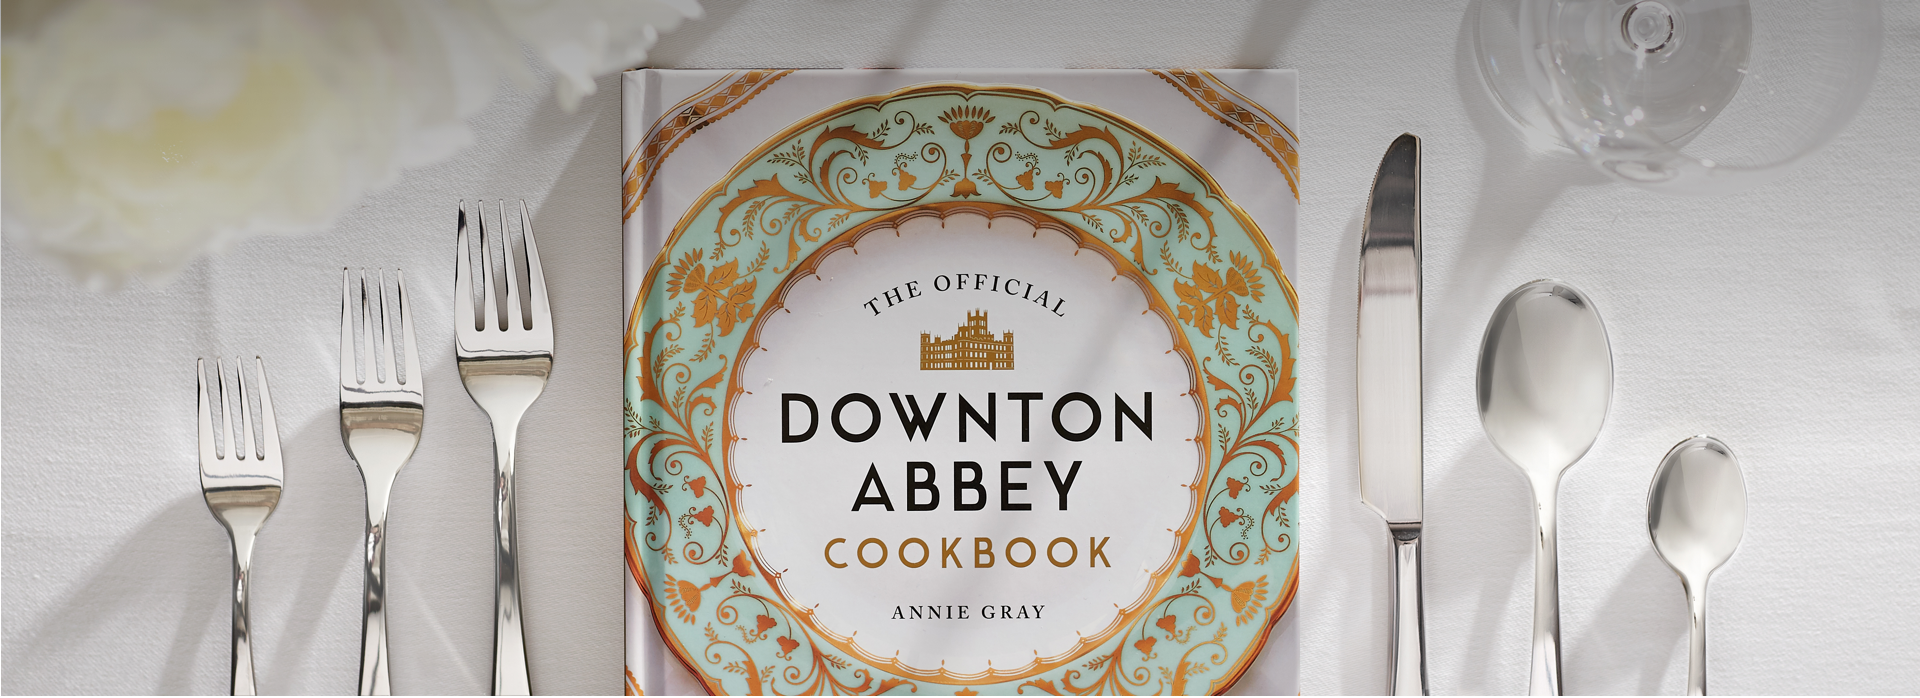 Photo of table setting with Downton Abbey Cookbook placed where the plate should be